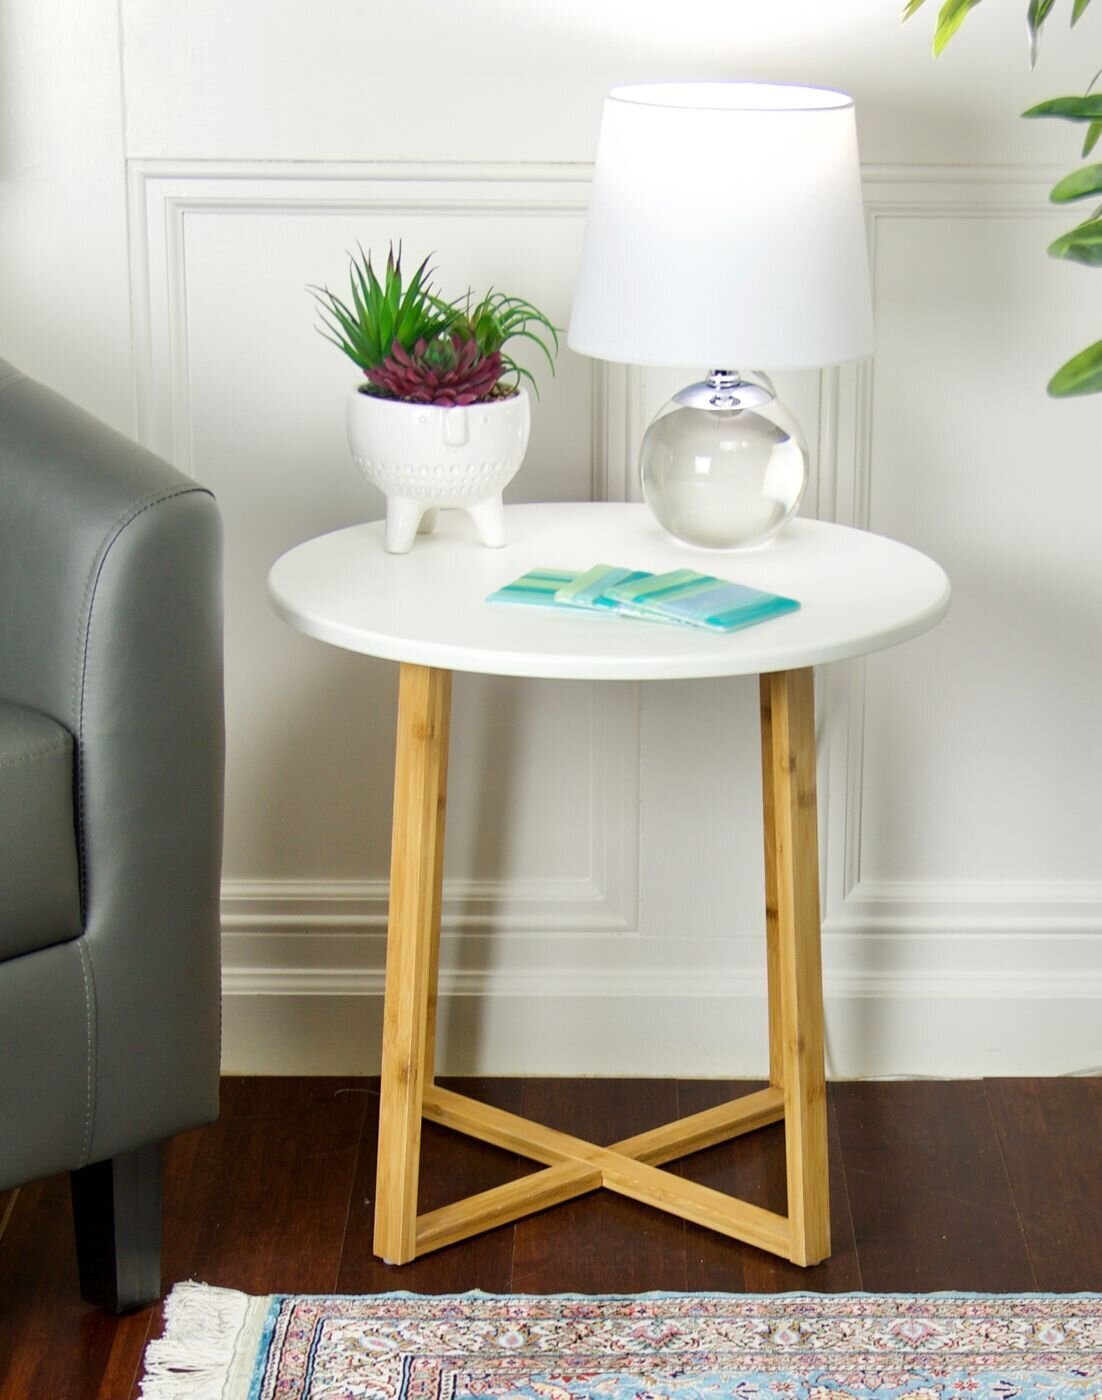 Bamboo end table in a different color